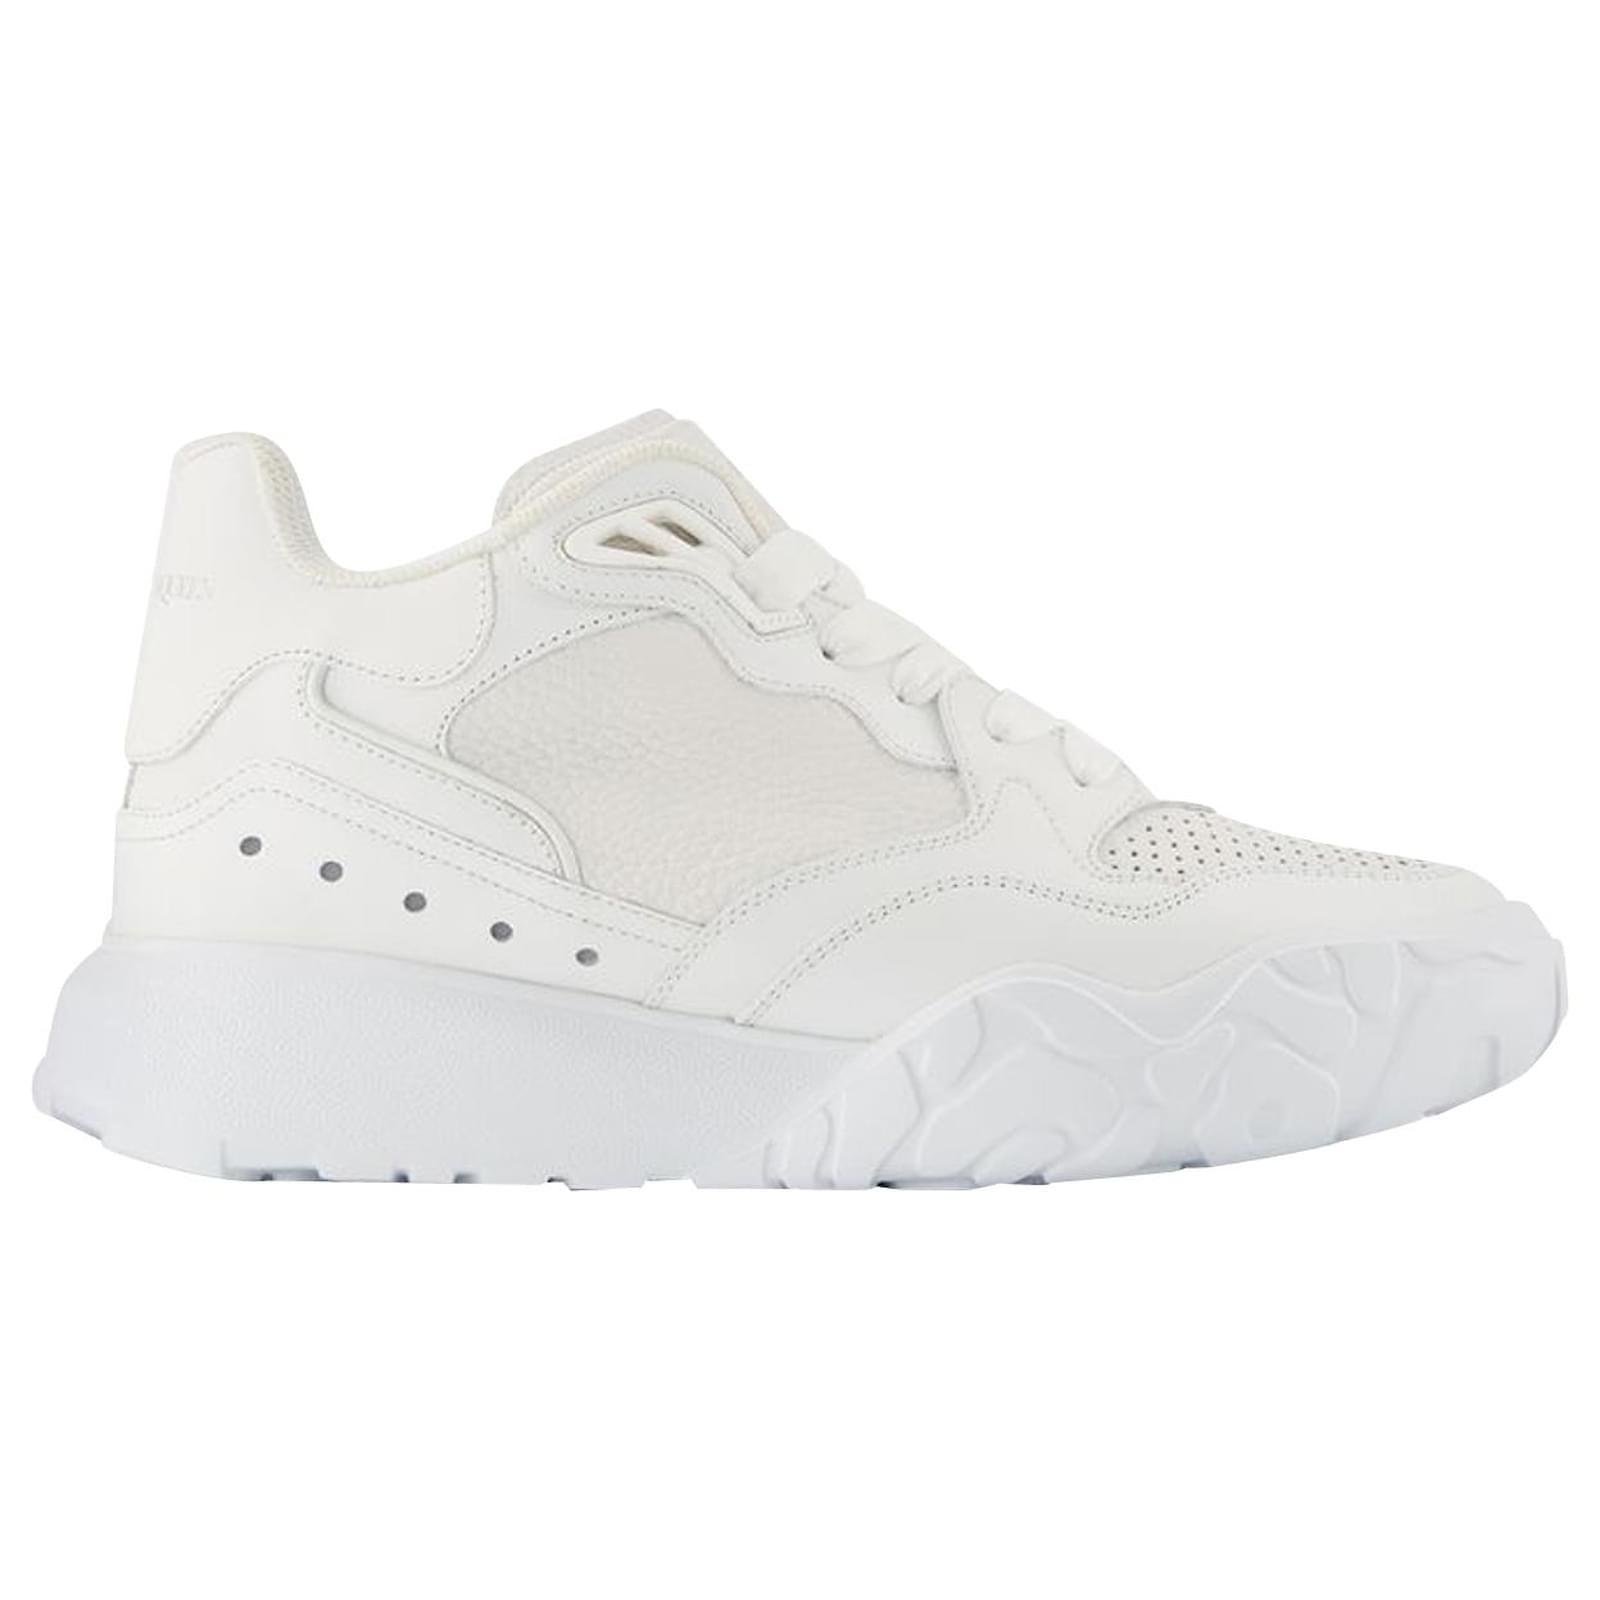 Court Sneakers - Alexander McQueen - White - Leather